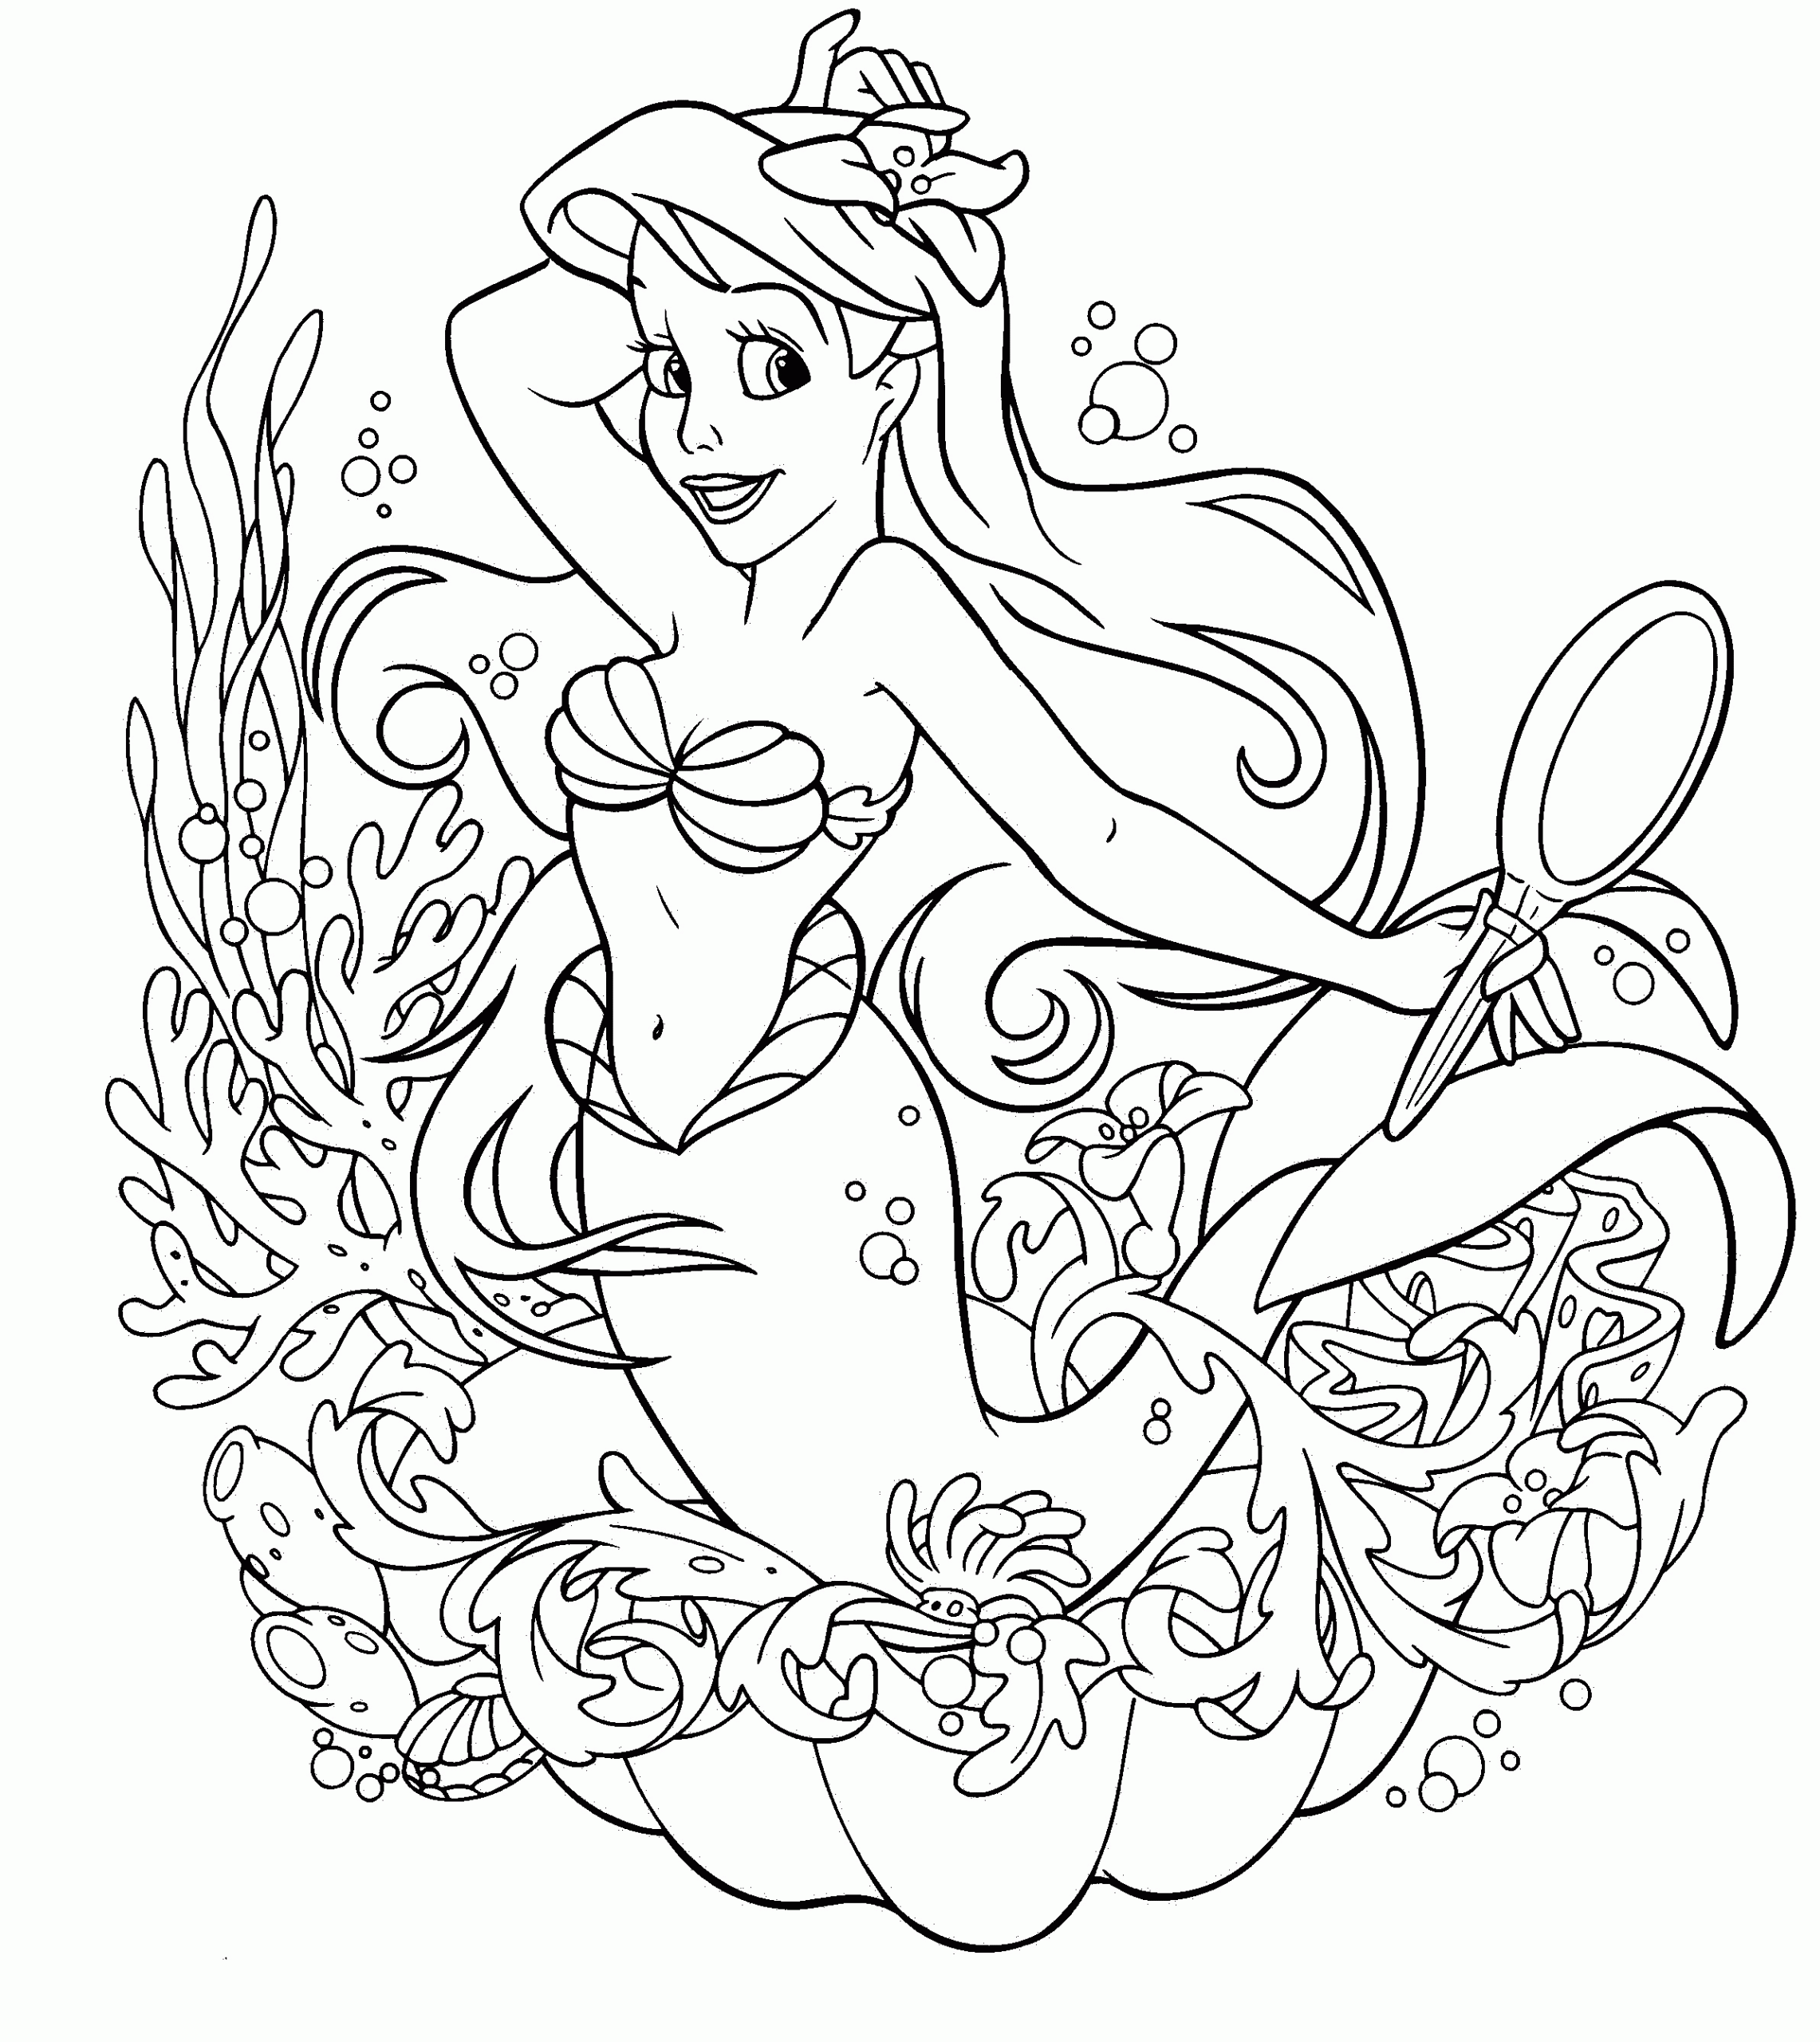 Printable Coloring Pages Girls
 Coloring Pages for Girls Dr Odd